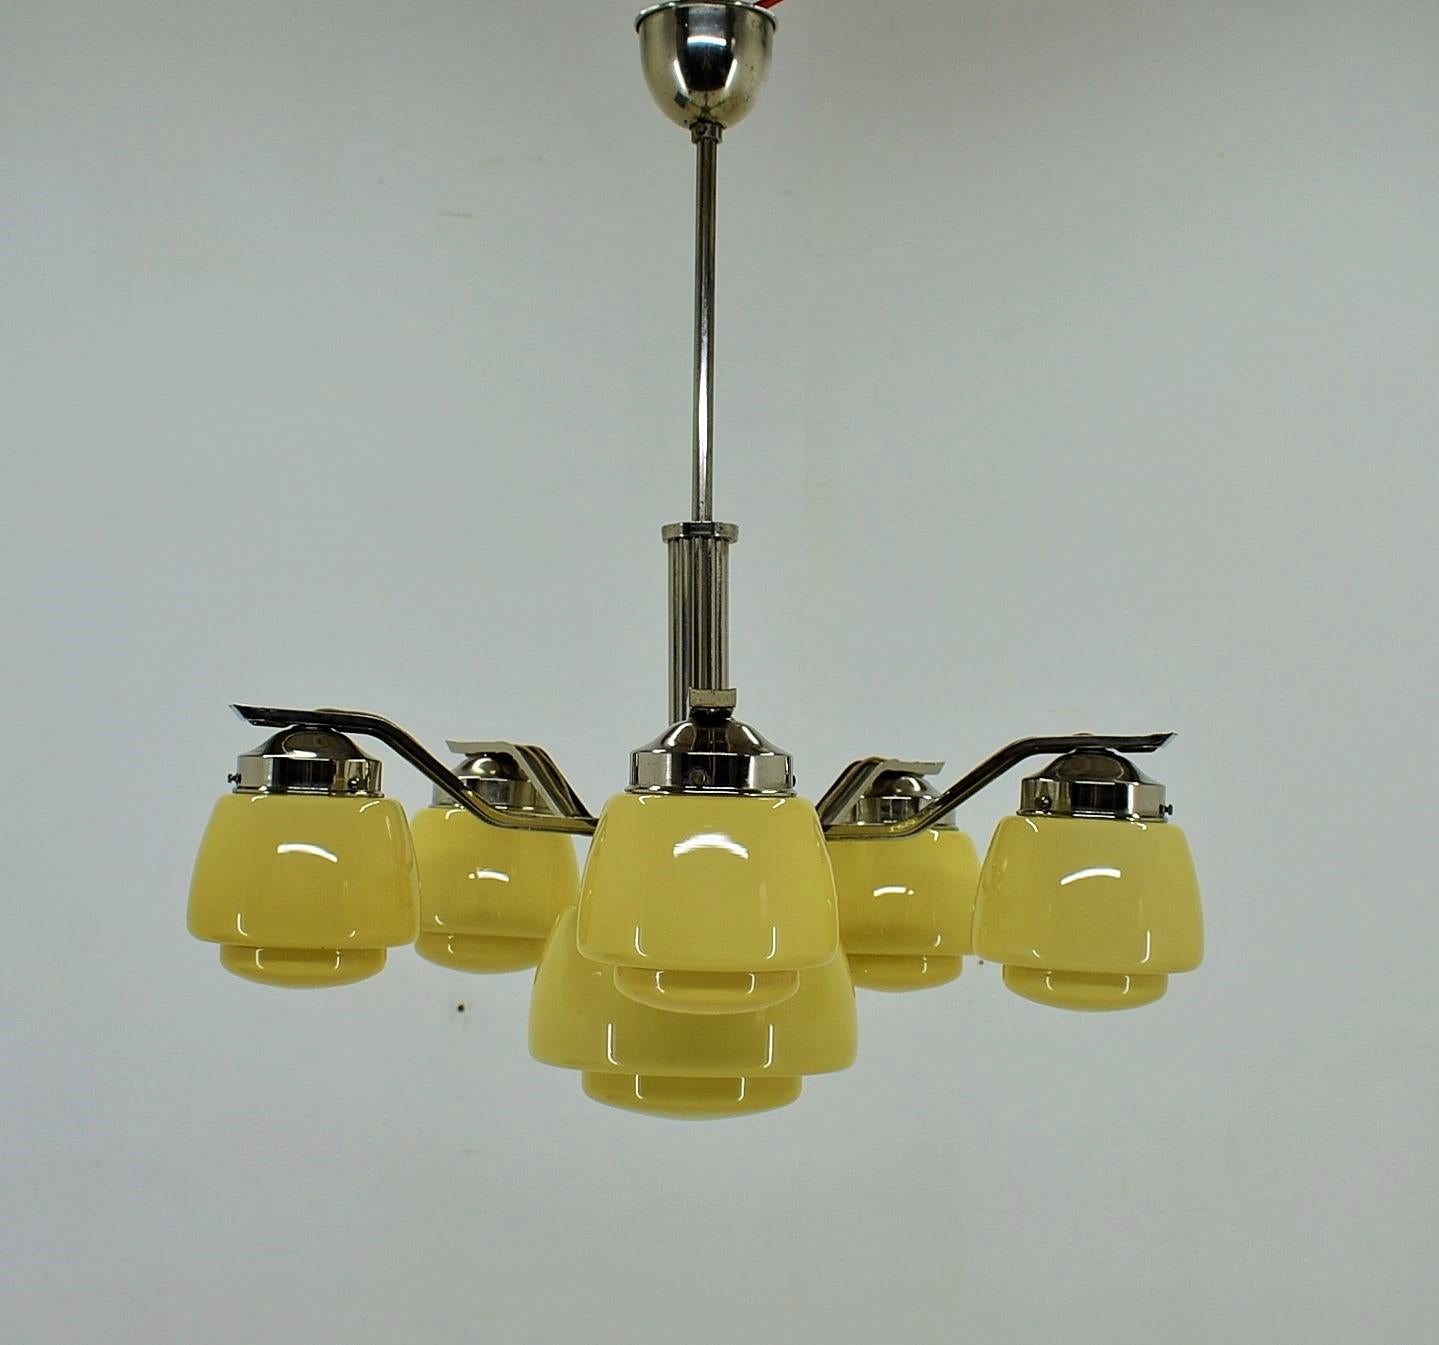 Beautiful Art Deco chandelier made of chrome and glass.
Good condition.